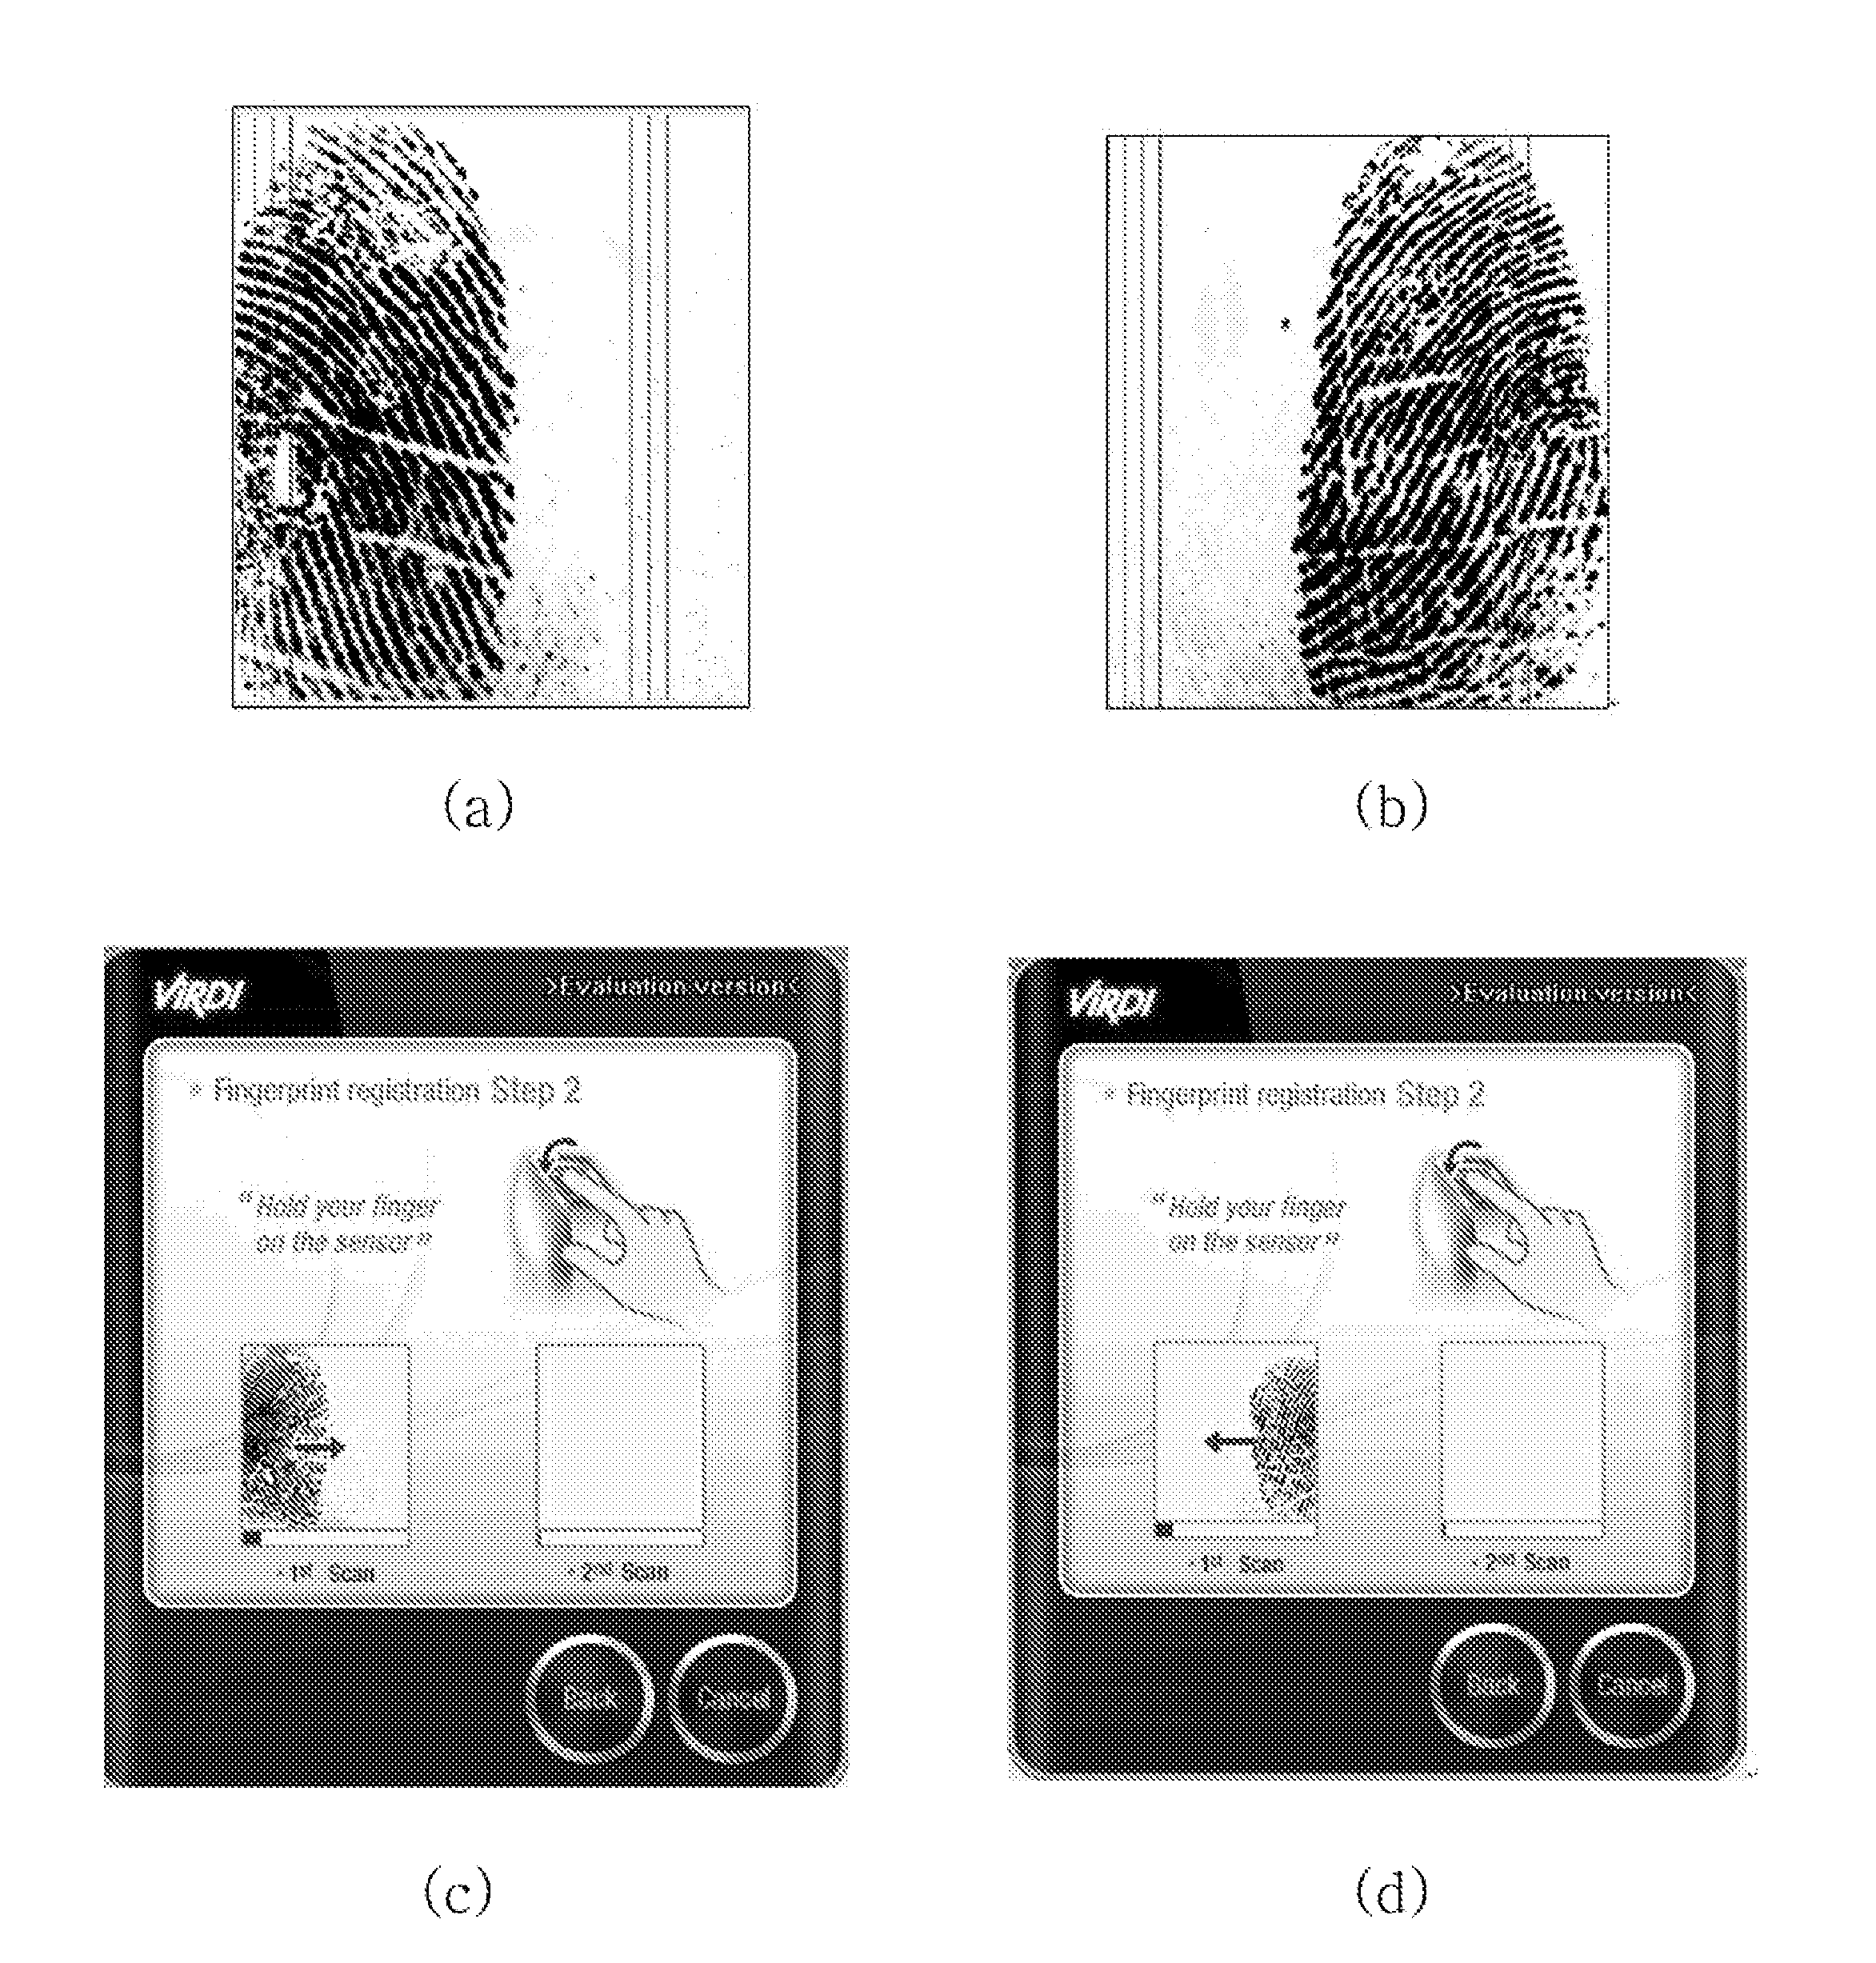 Fingerprint recognition apparatus and method thereof of acquiring fingerprint data